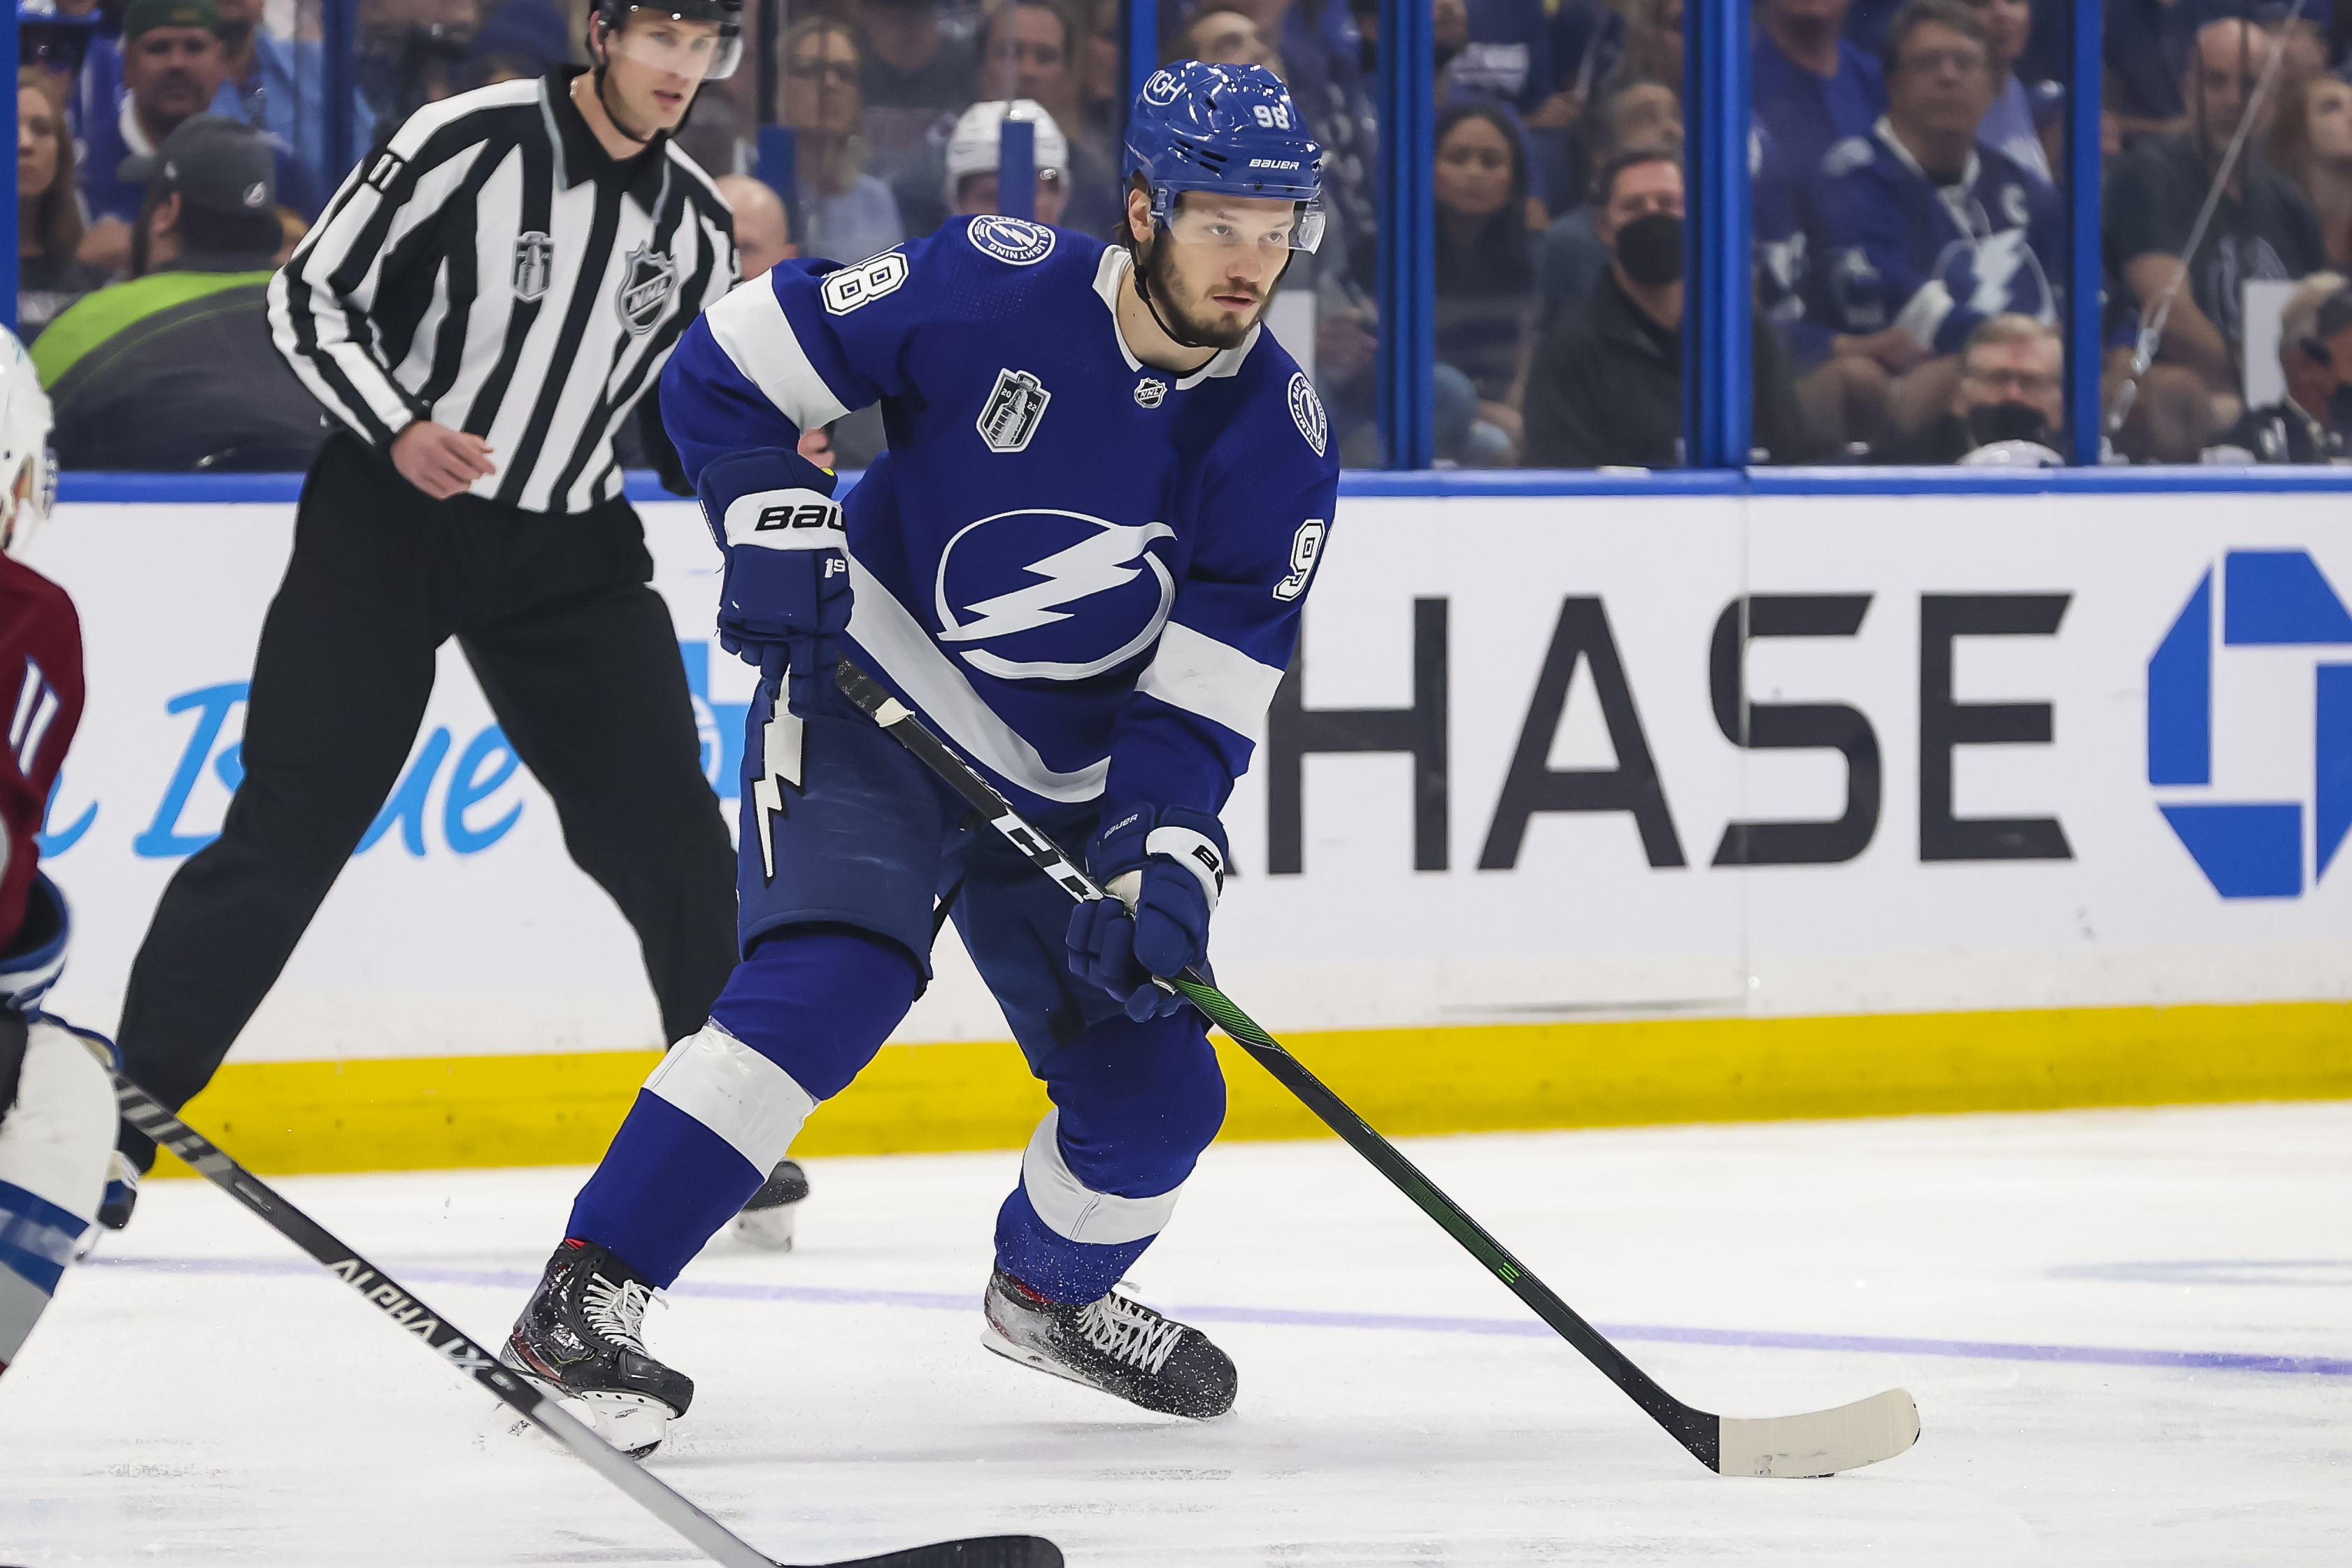 Mikhail Sergachev #98 of the Tampa Bay Lightning skates against the Colorado Avalanche during first period in Game Six of the 2022 Stanley Cup Final at Amalie Arena on June 26, 2022 in Tampa, Florida.